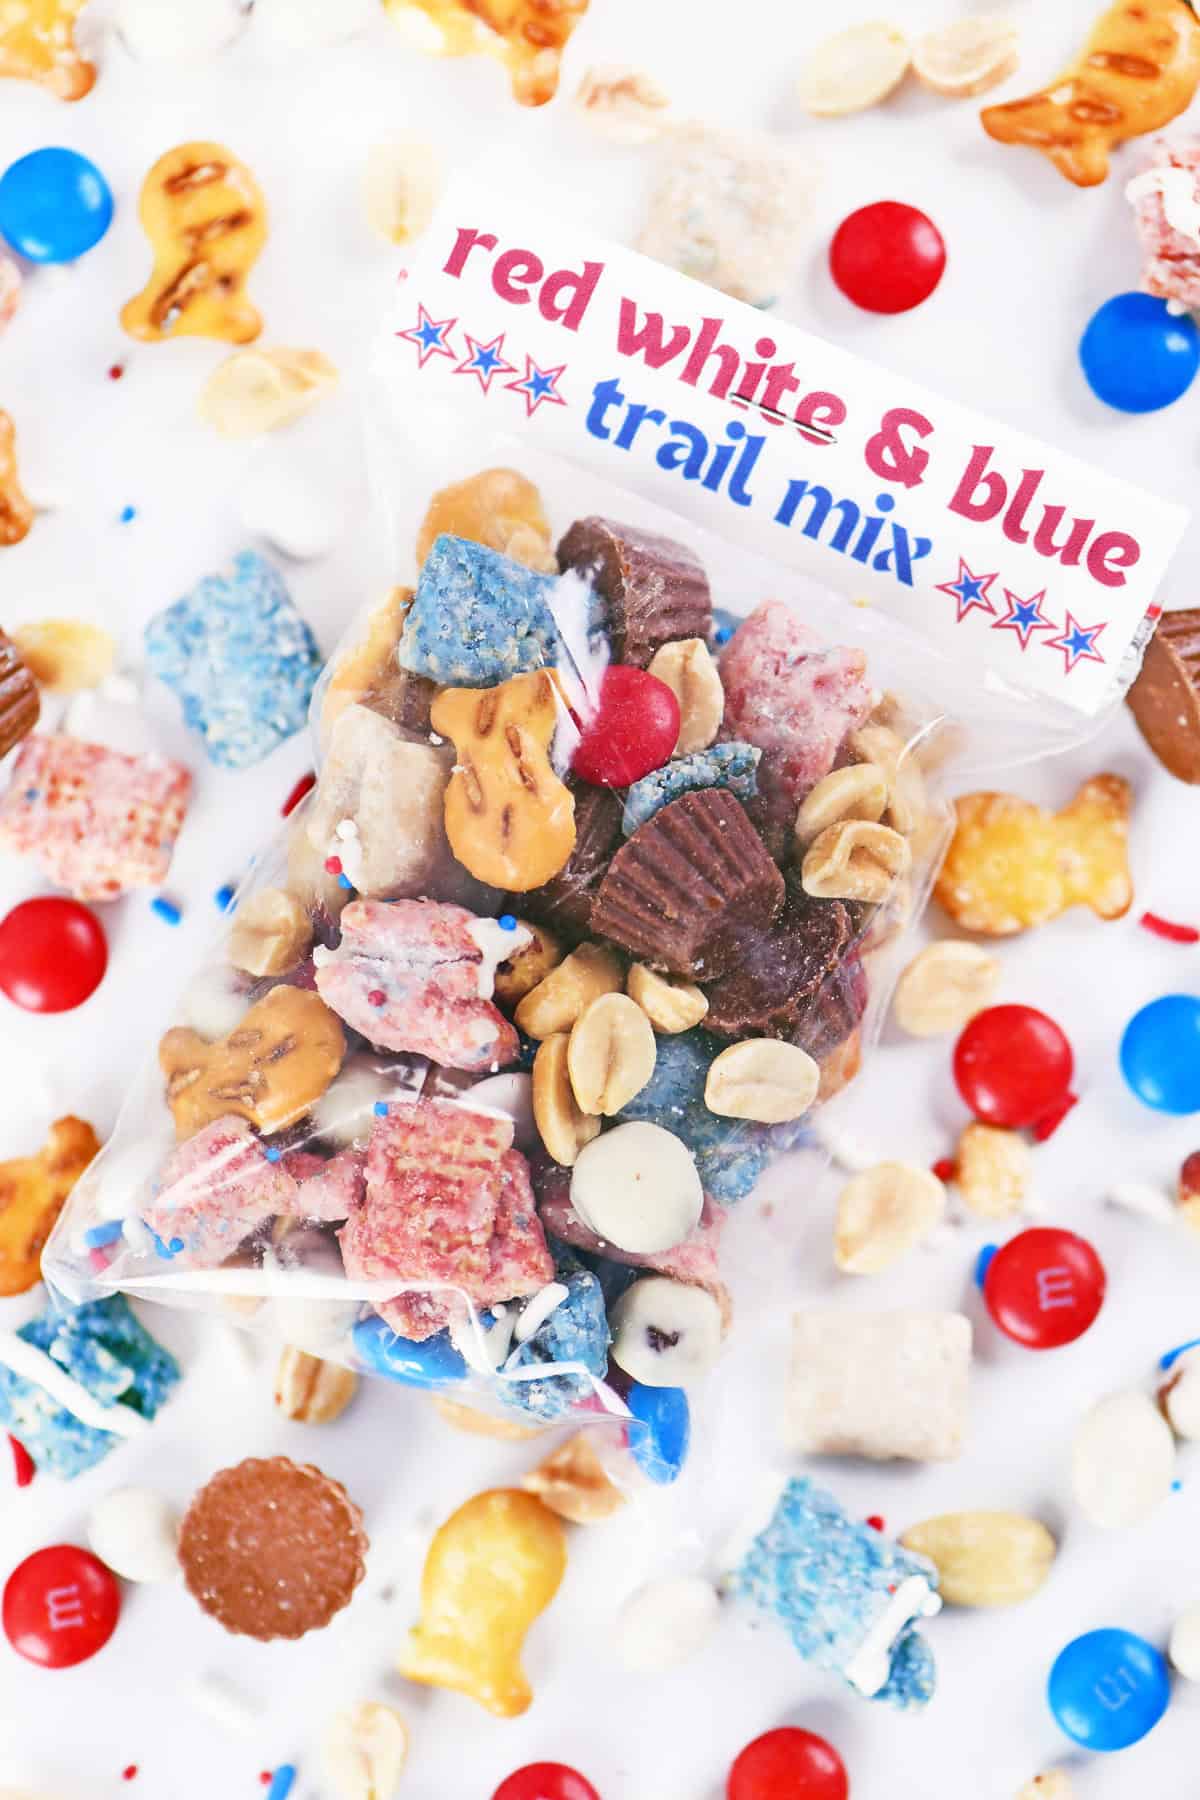 Red white and blue trail mix in a labeled bag.